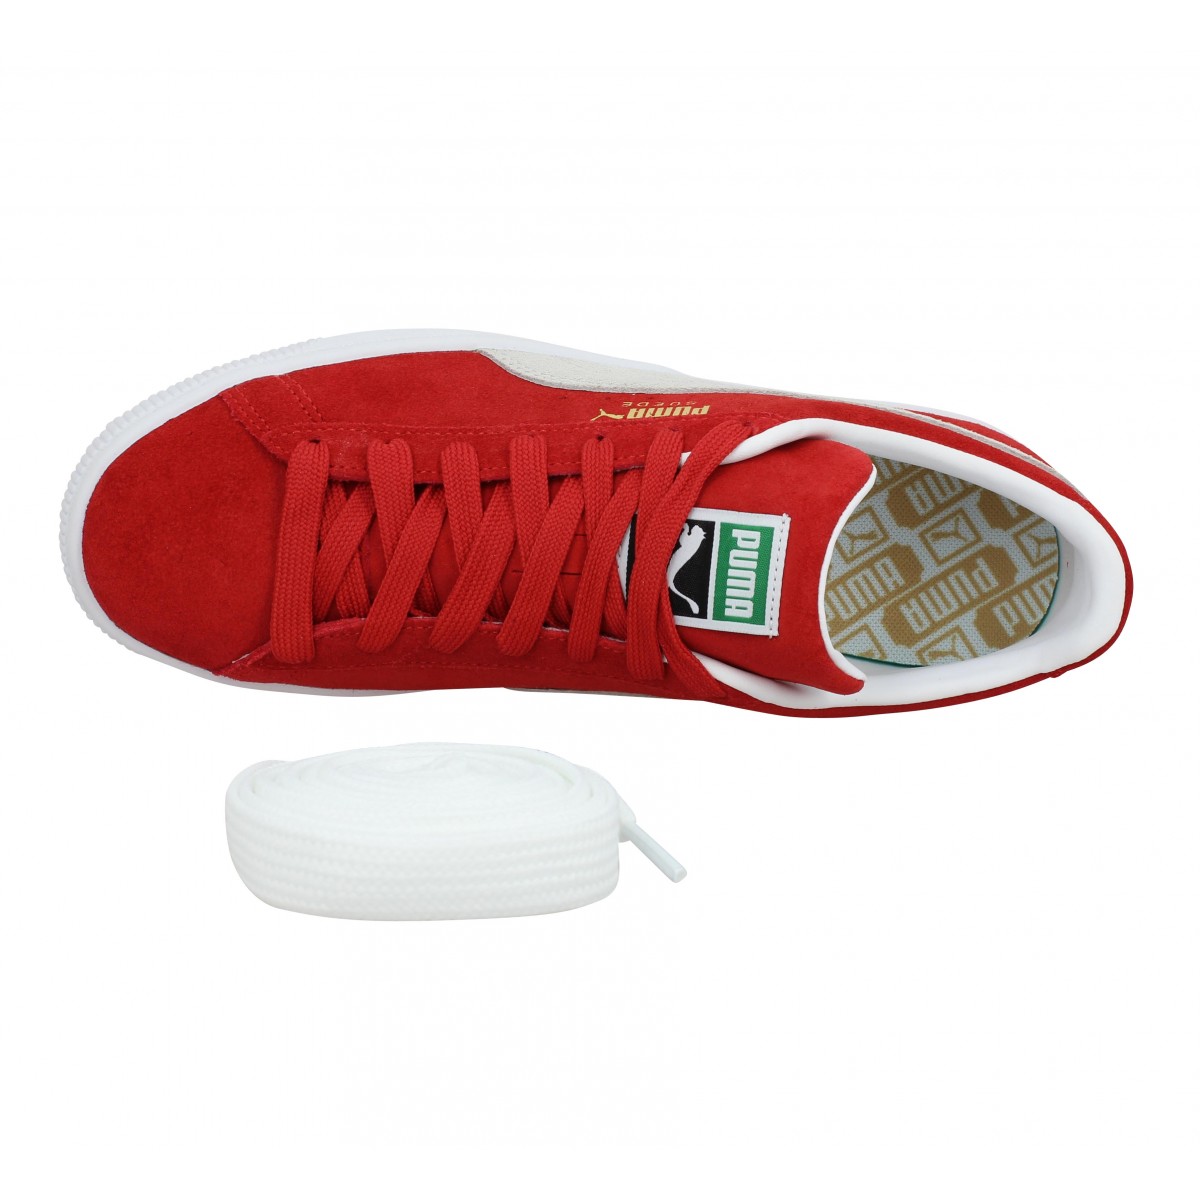 puma sneakers homme rouge قاعدة  و